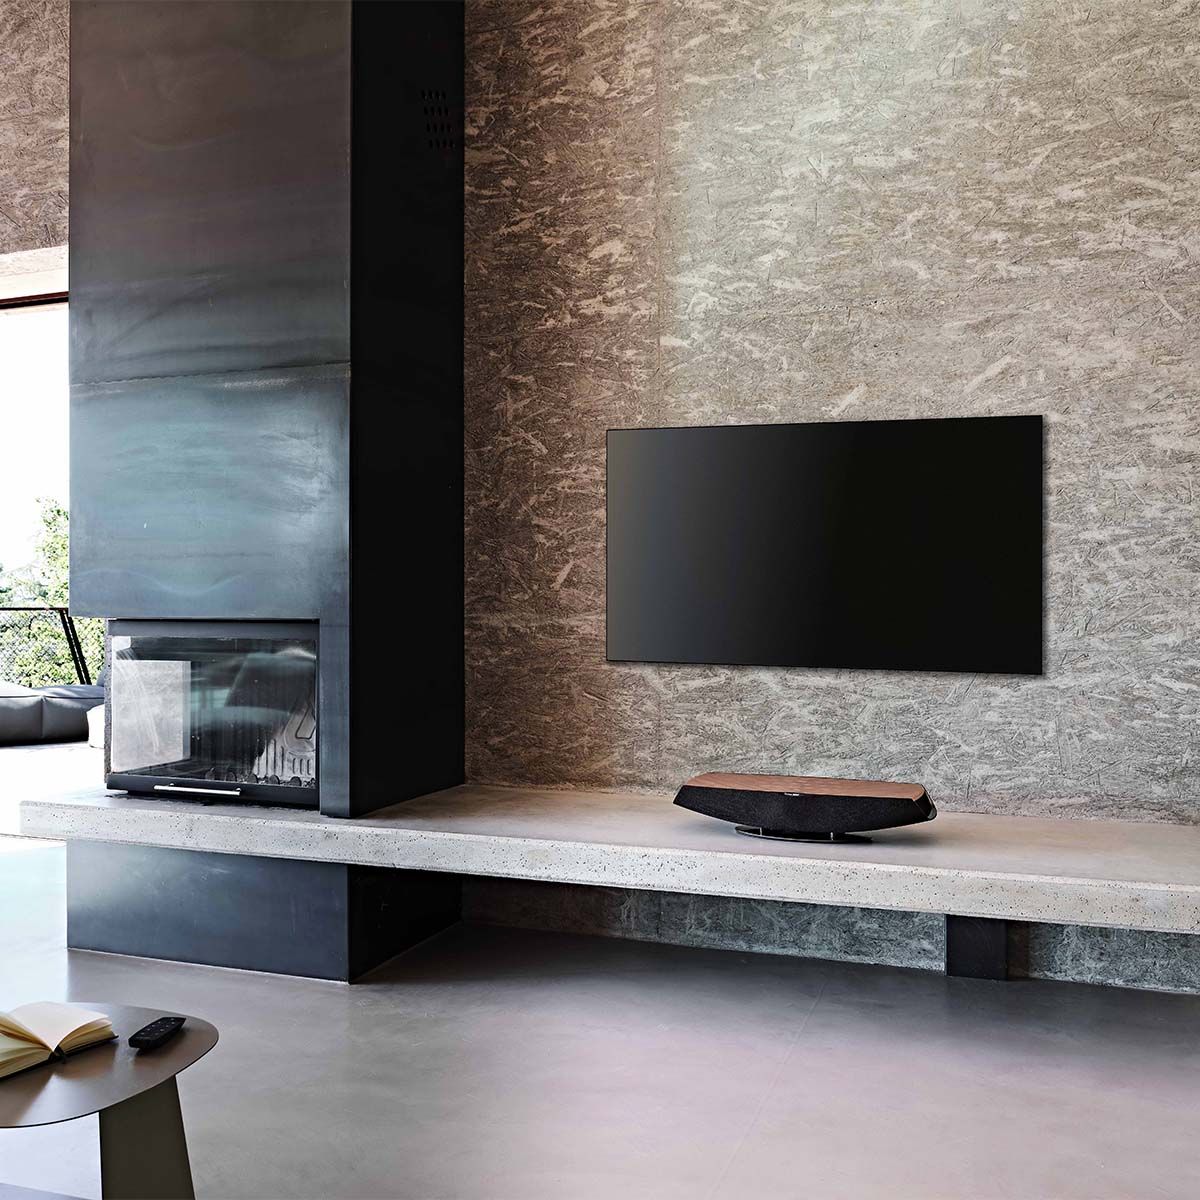 Sonus Faber Omnia Wireless Smart Speaker, Walnut, on a marble media stand beneath a wall-mounted television